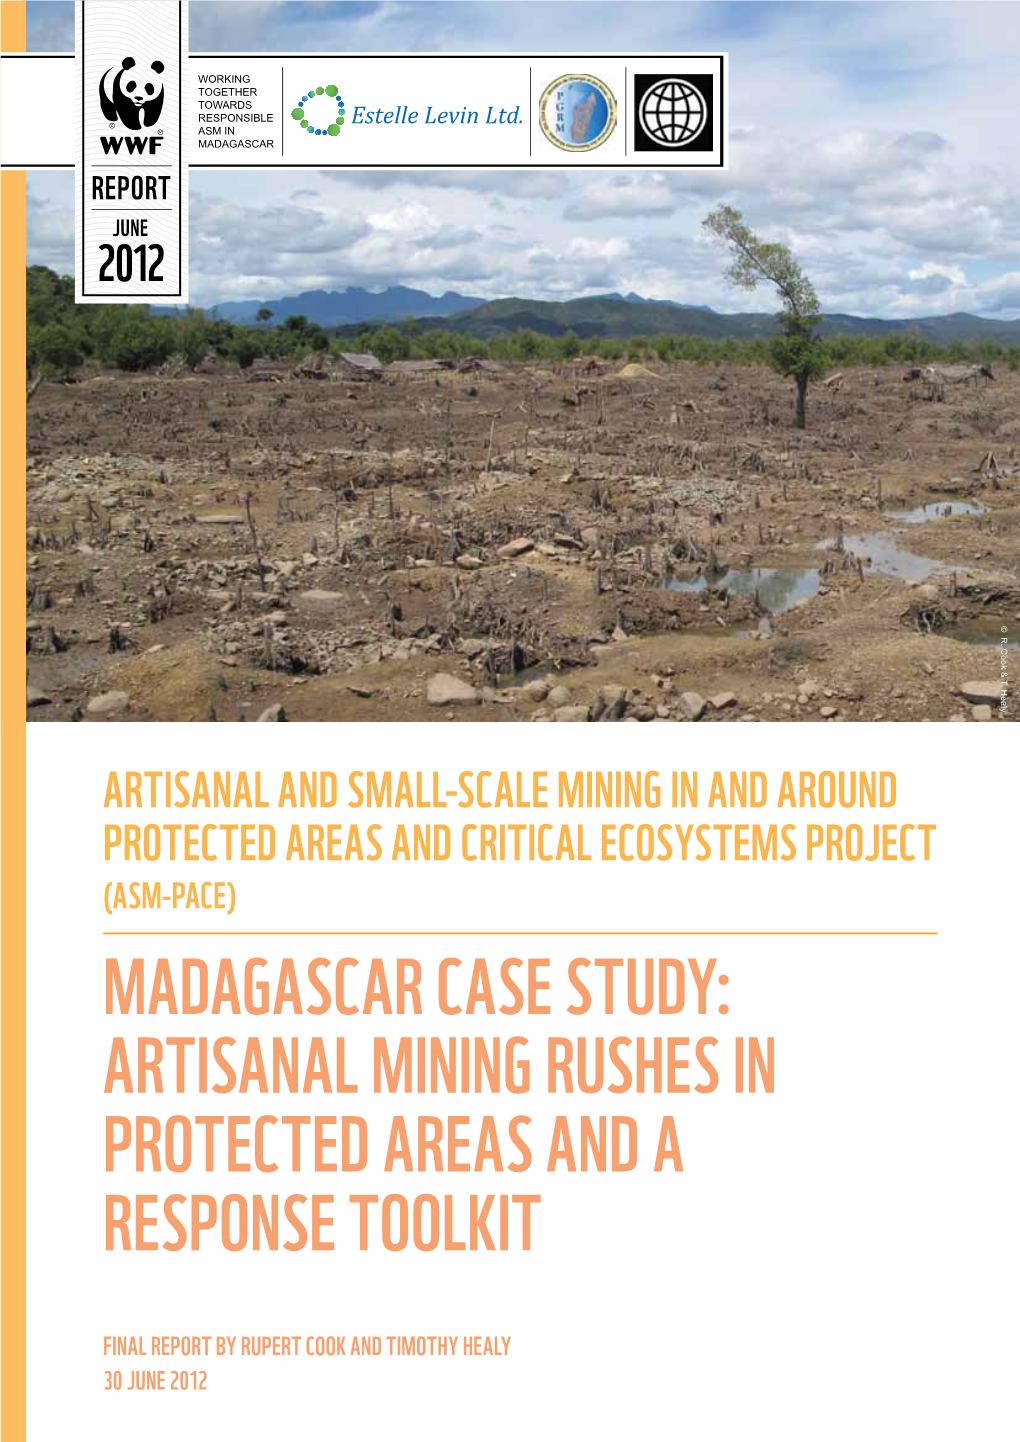 Madagascar Case Study: Artisanal Mining Rushes in Protected Areas and a Response Toolkit